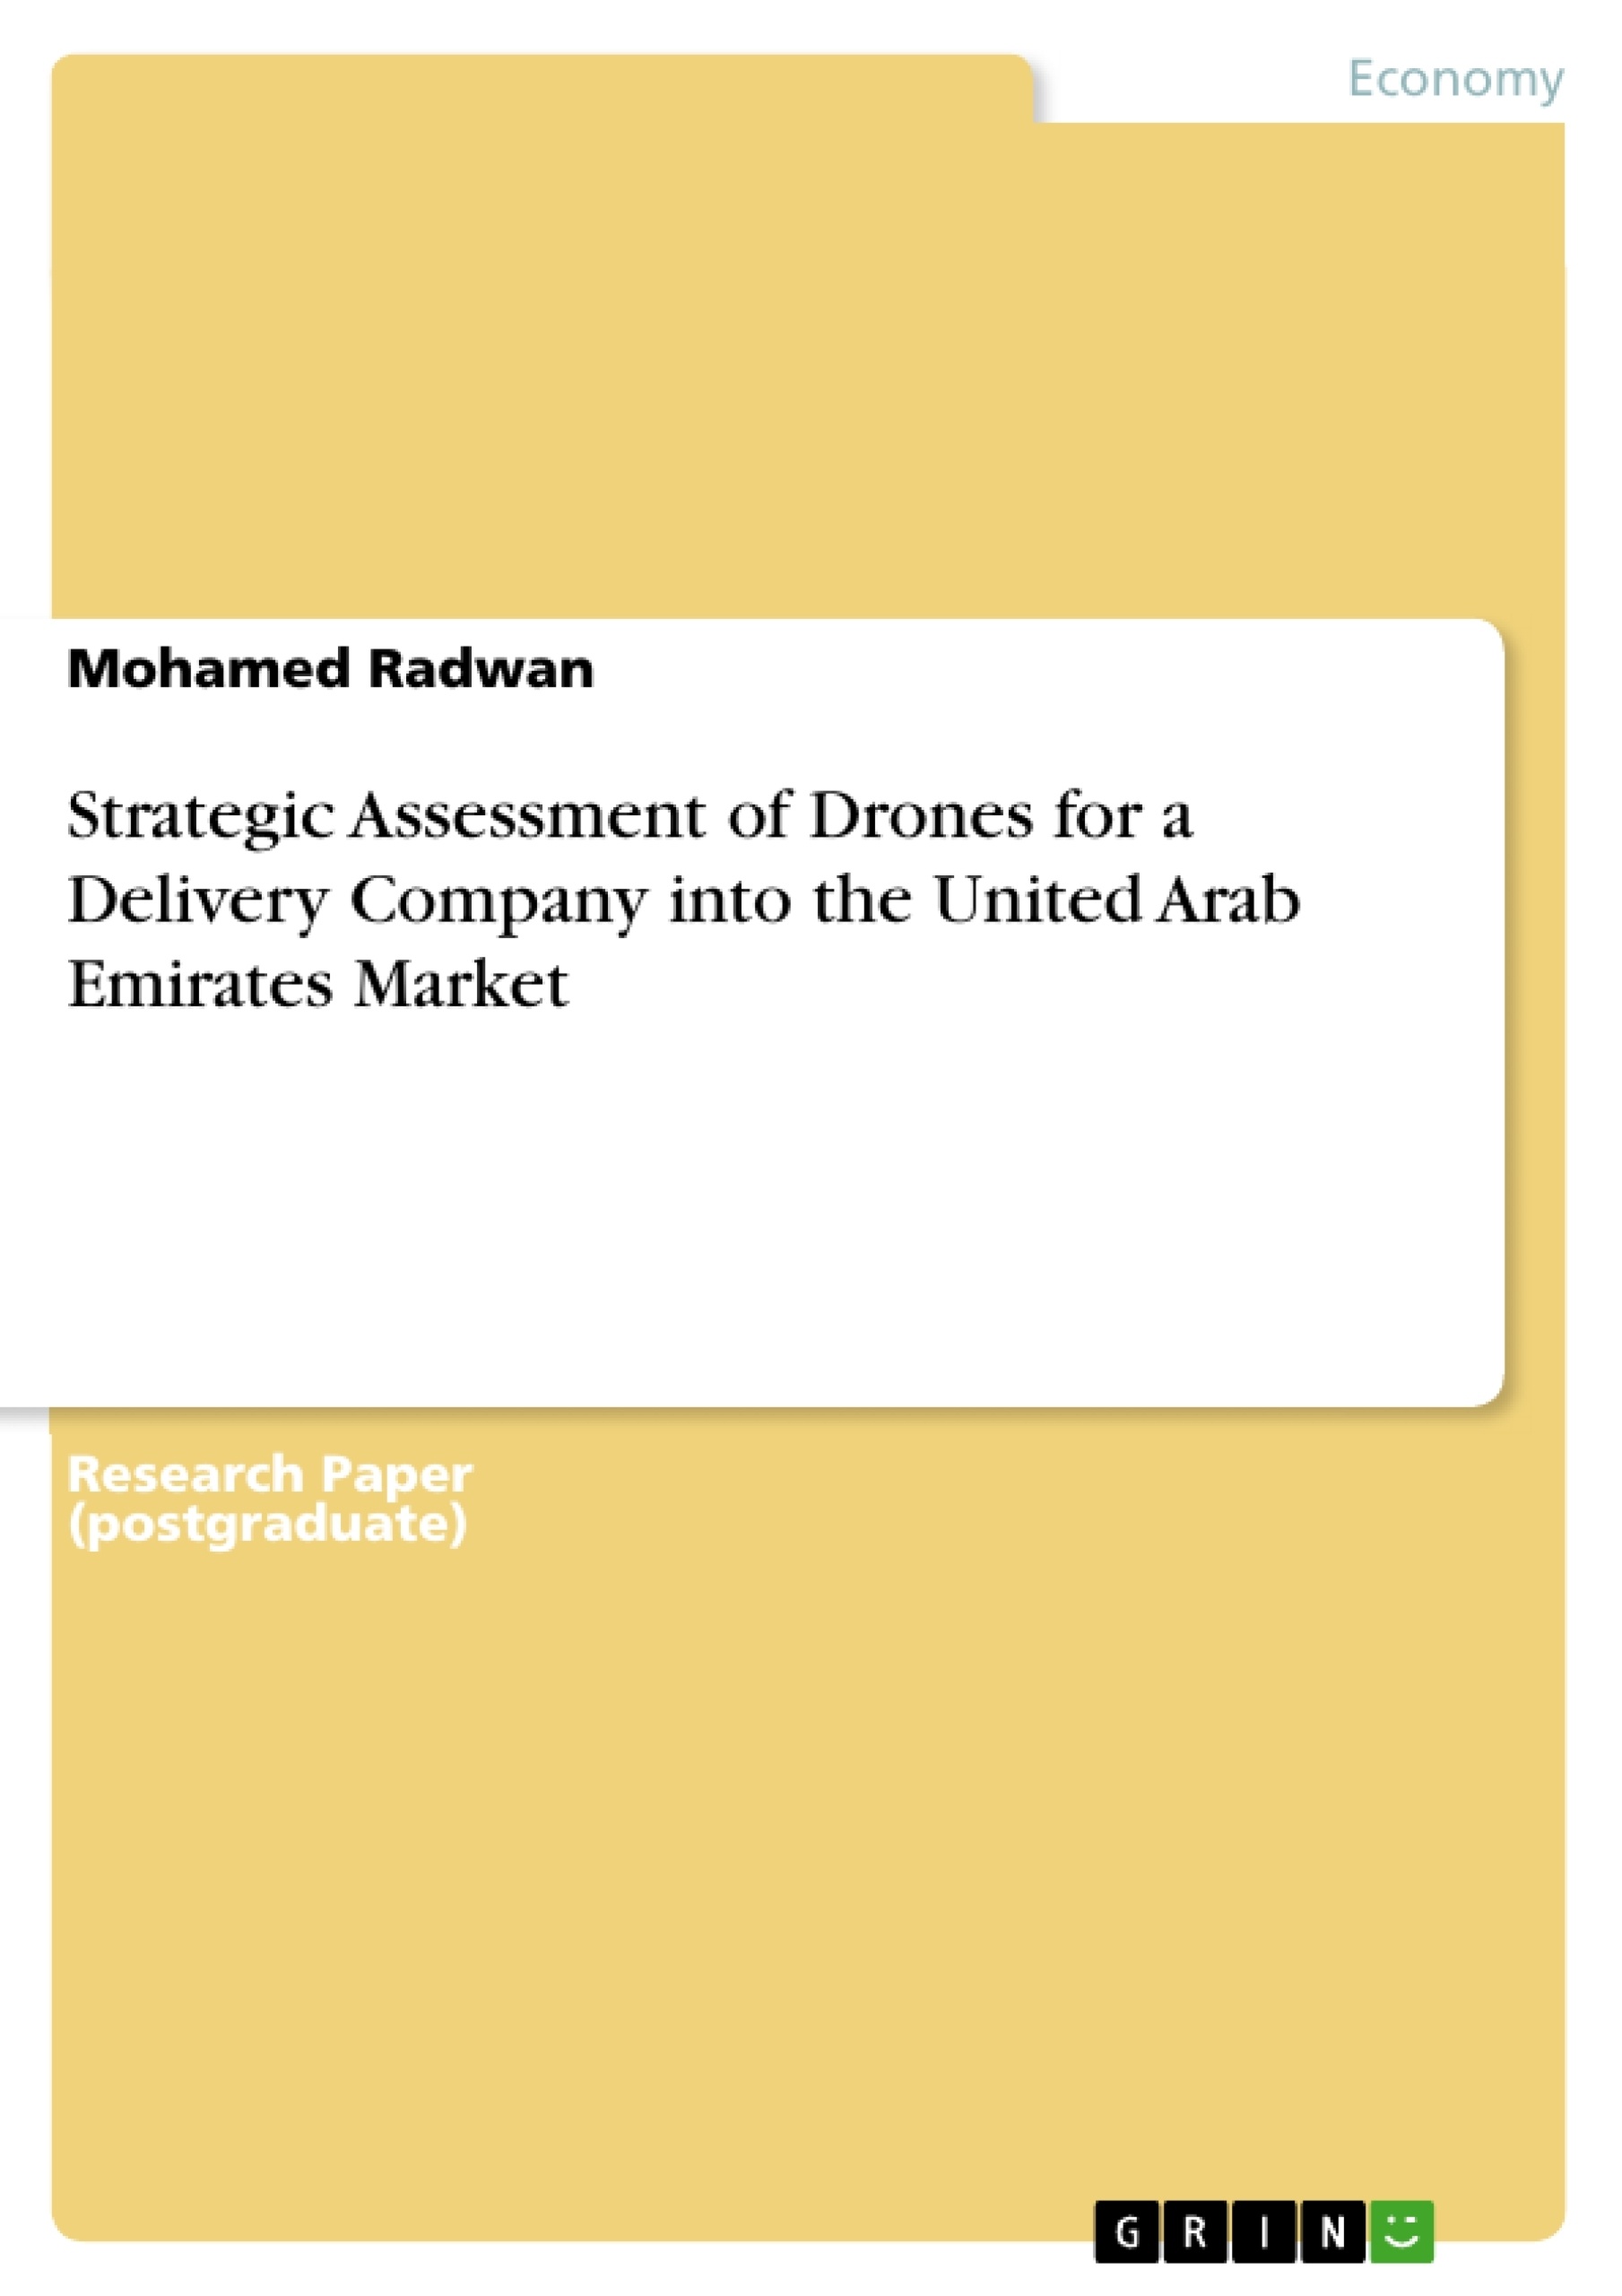 Title: Strategic Assessment of Drones for a Delivery Company into the United Arab Emirates Market